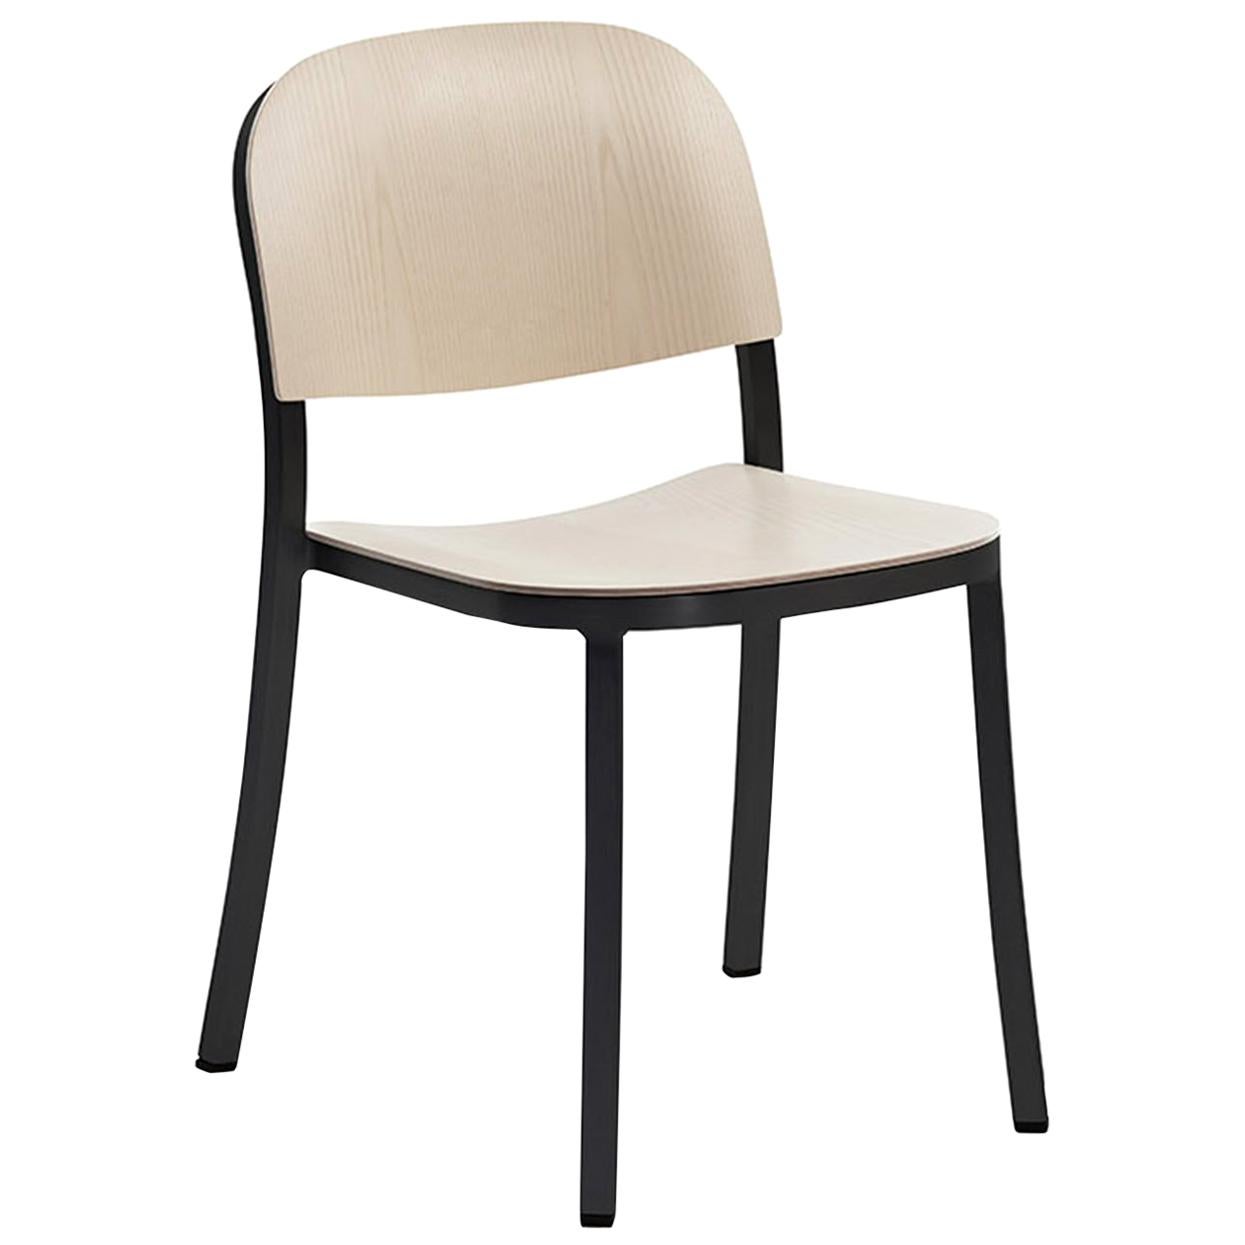 Emeco 1 Inch Stacking Chair in Dark Aluminum and Ash by Jasper Morrison For Sale